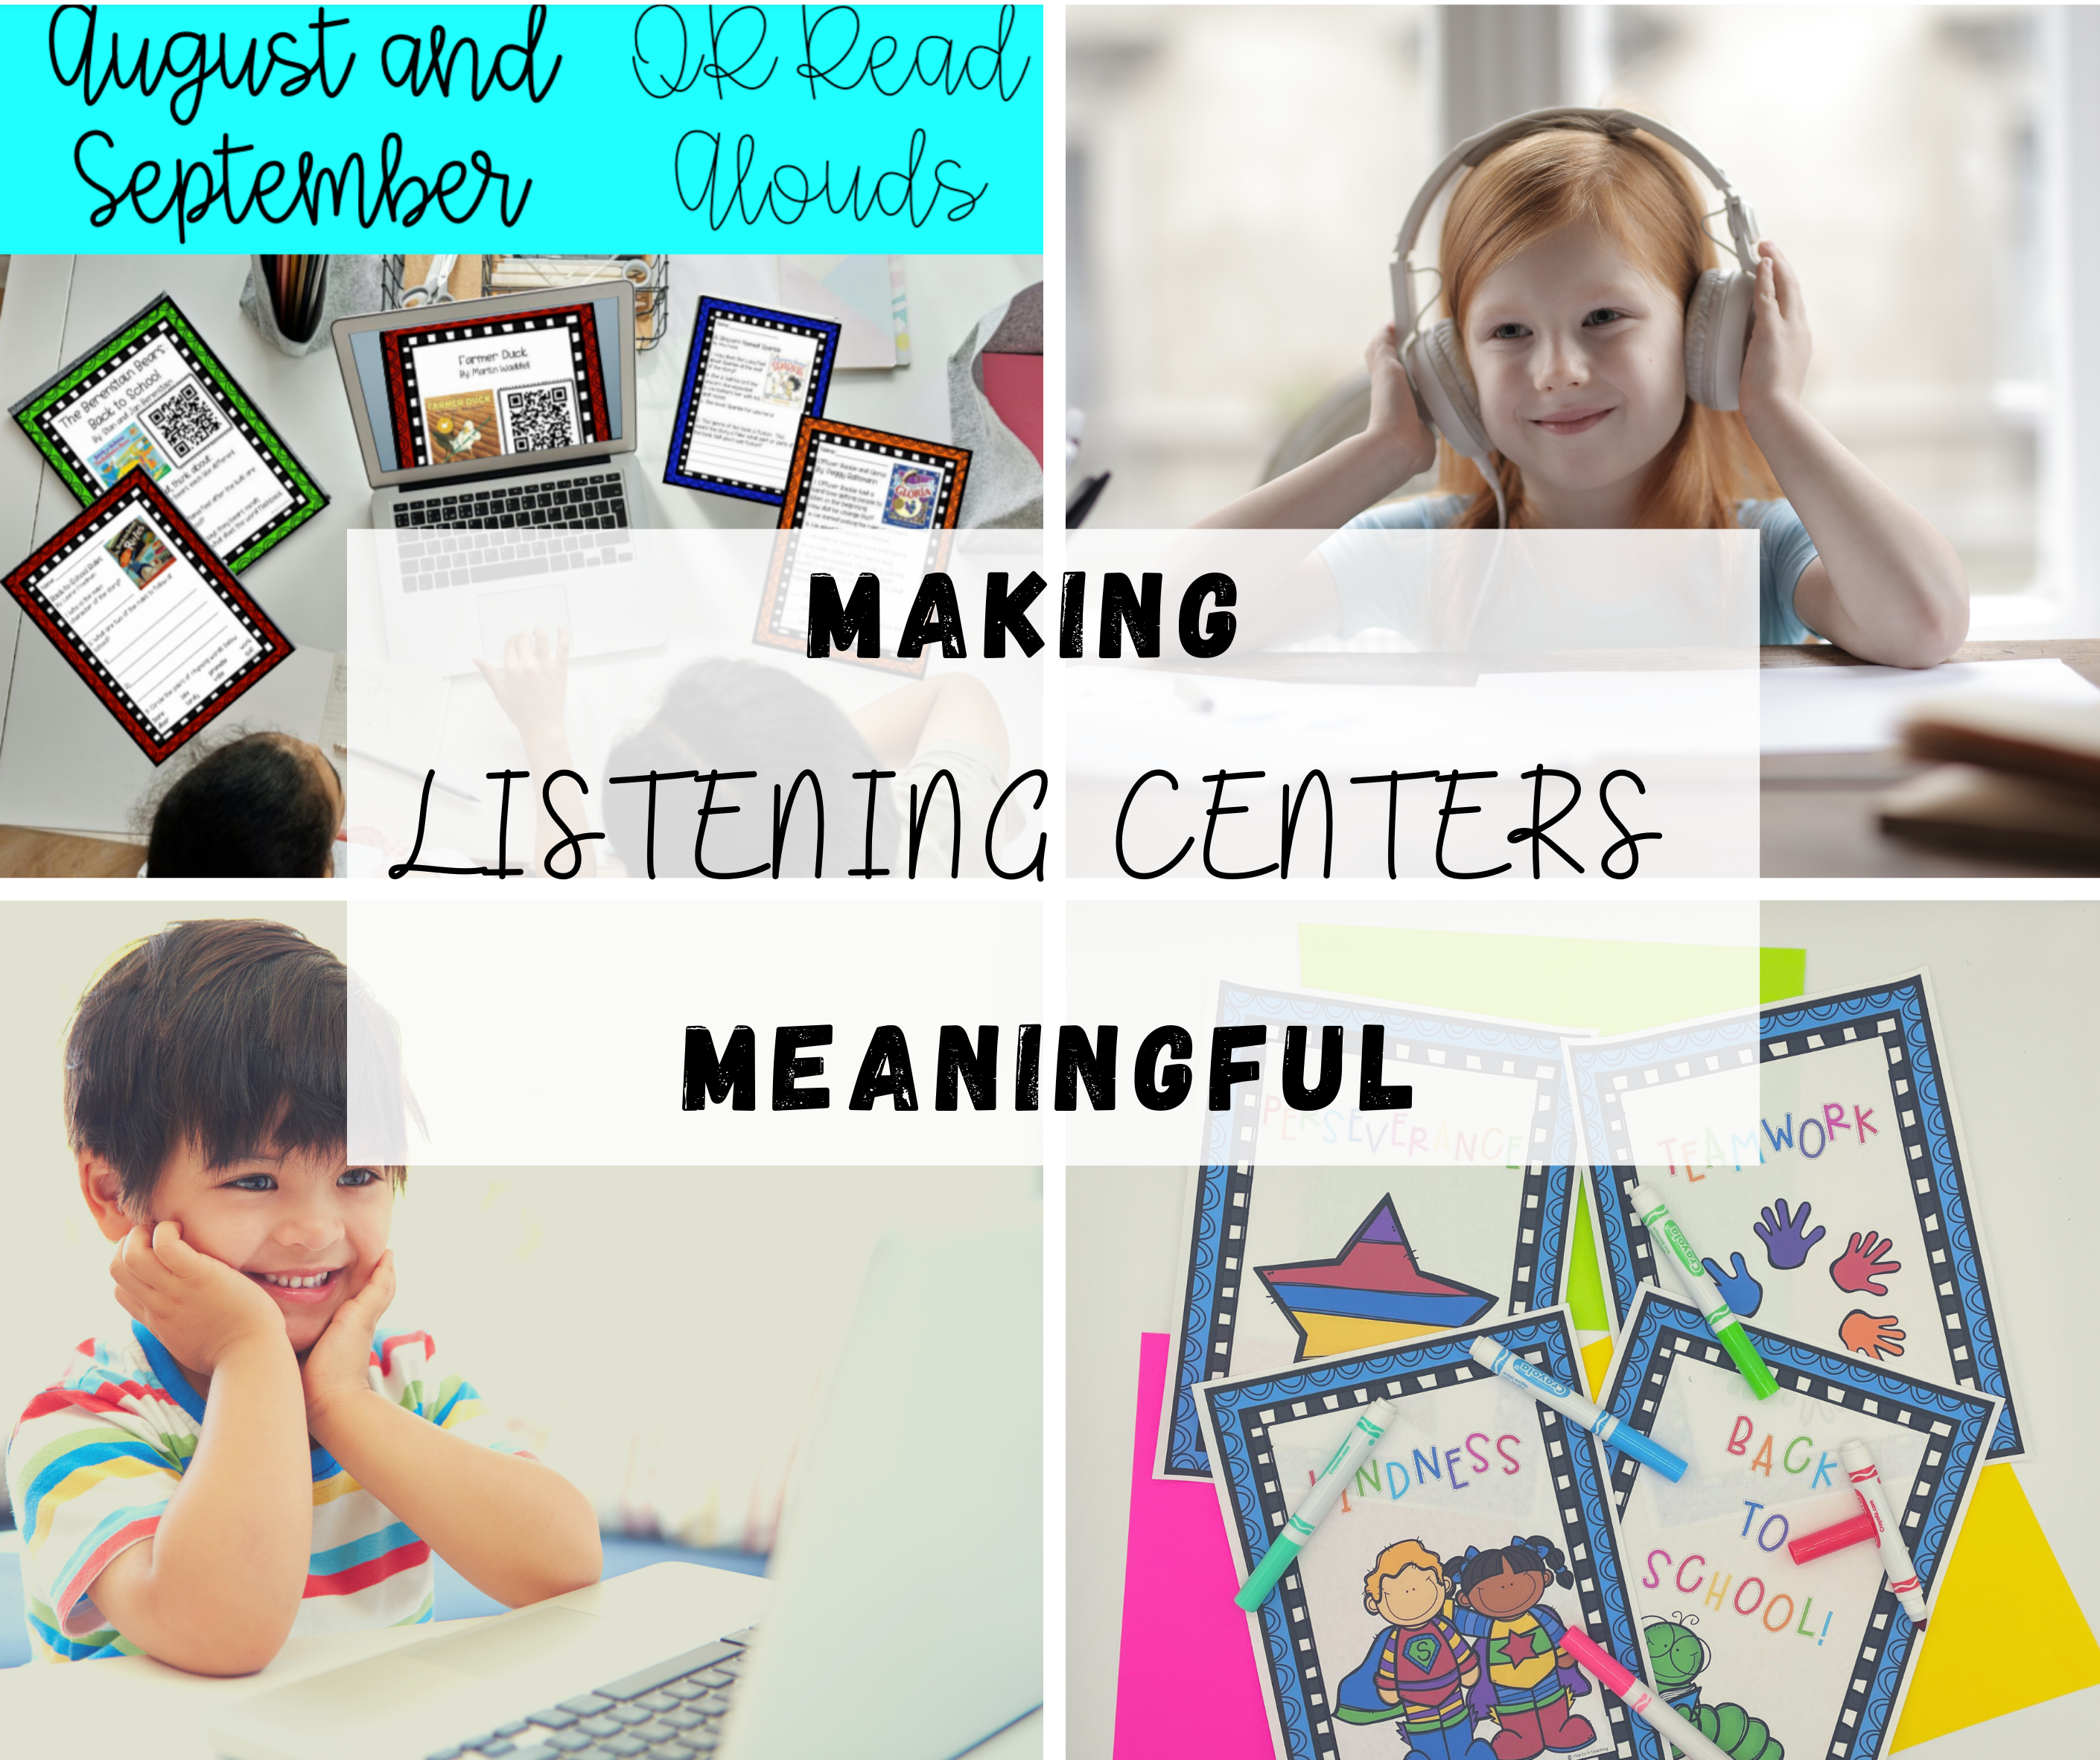 Listening Activities for Back to School (August or September